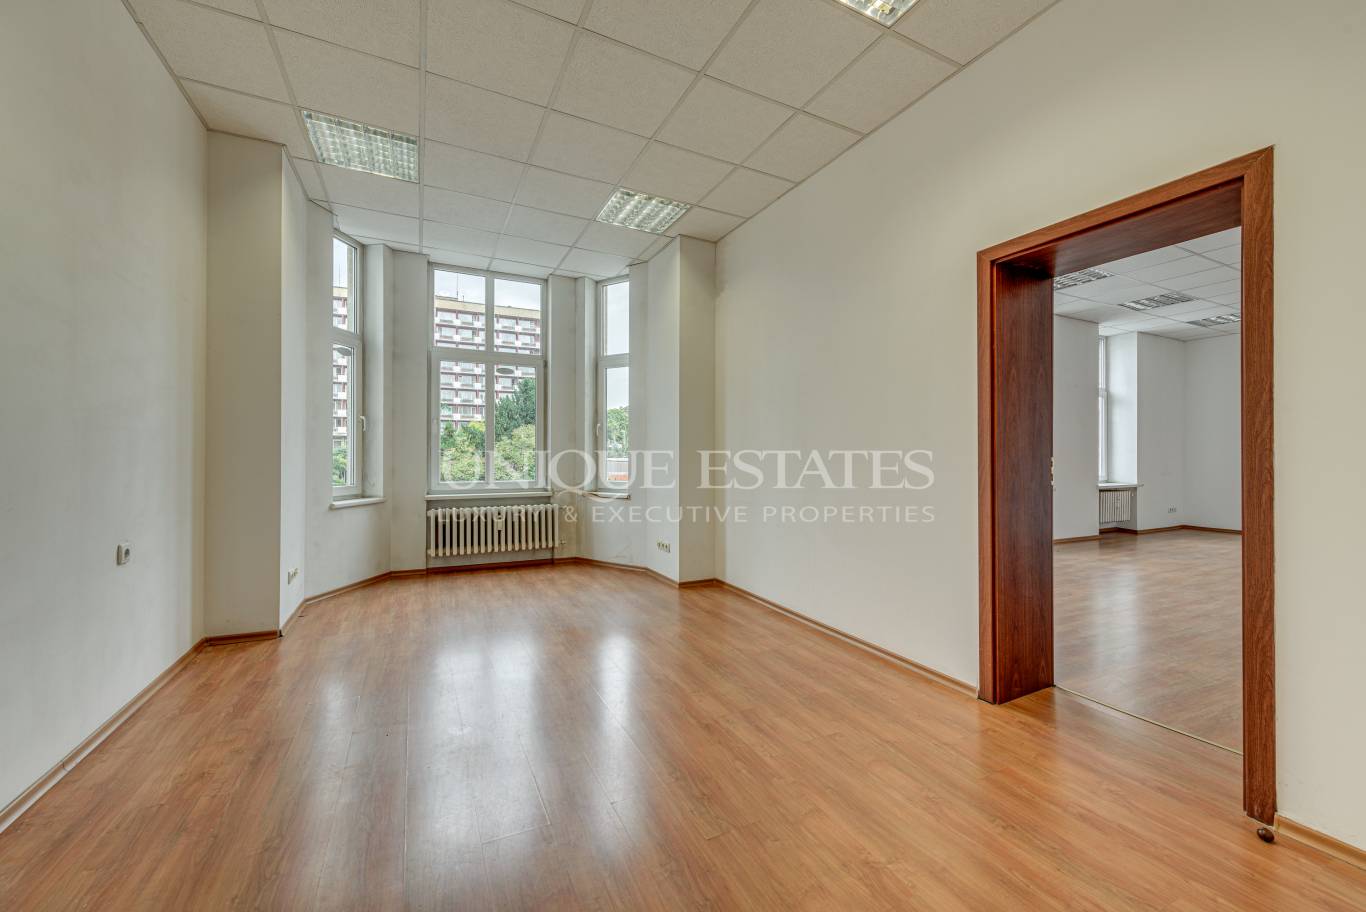 Office for rent in Sofia, Downtown with listing ID: K4831 - image 9